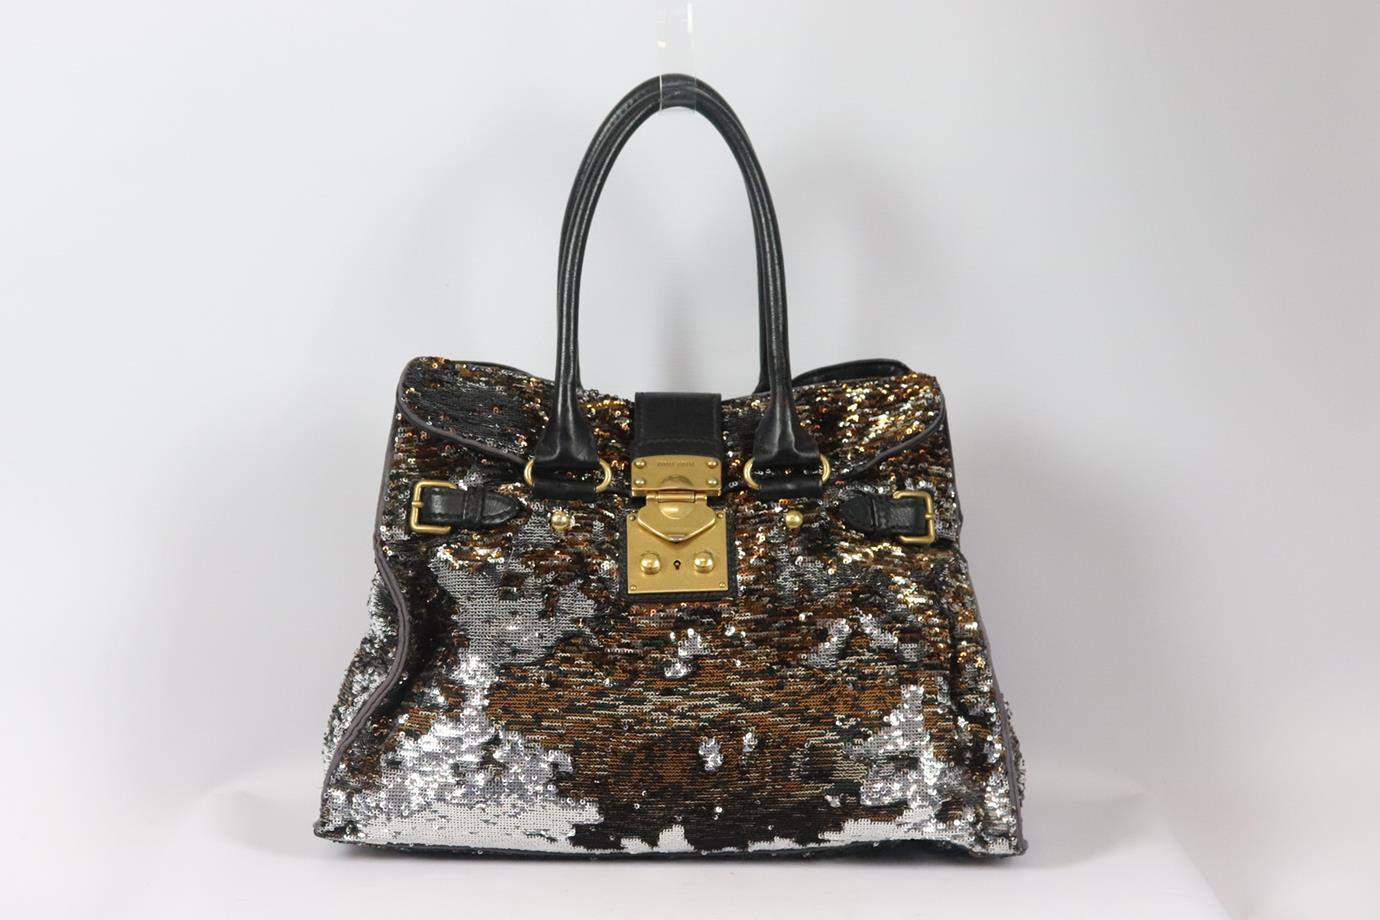 Miu Miu leather trimmed sequined satin tote bag. Silver, navy, brown and black. Push lock fastening at front. Does not come with dustbag or box. Height: 11.5 in. Width: 15.5 in. Depth:5.1 in. Handle Drop: 6.25 in. Good condition - Some signs of wear